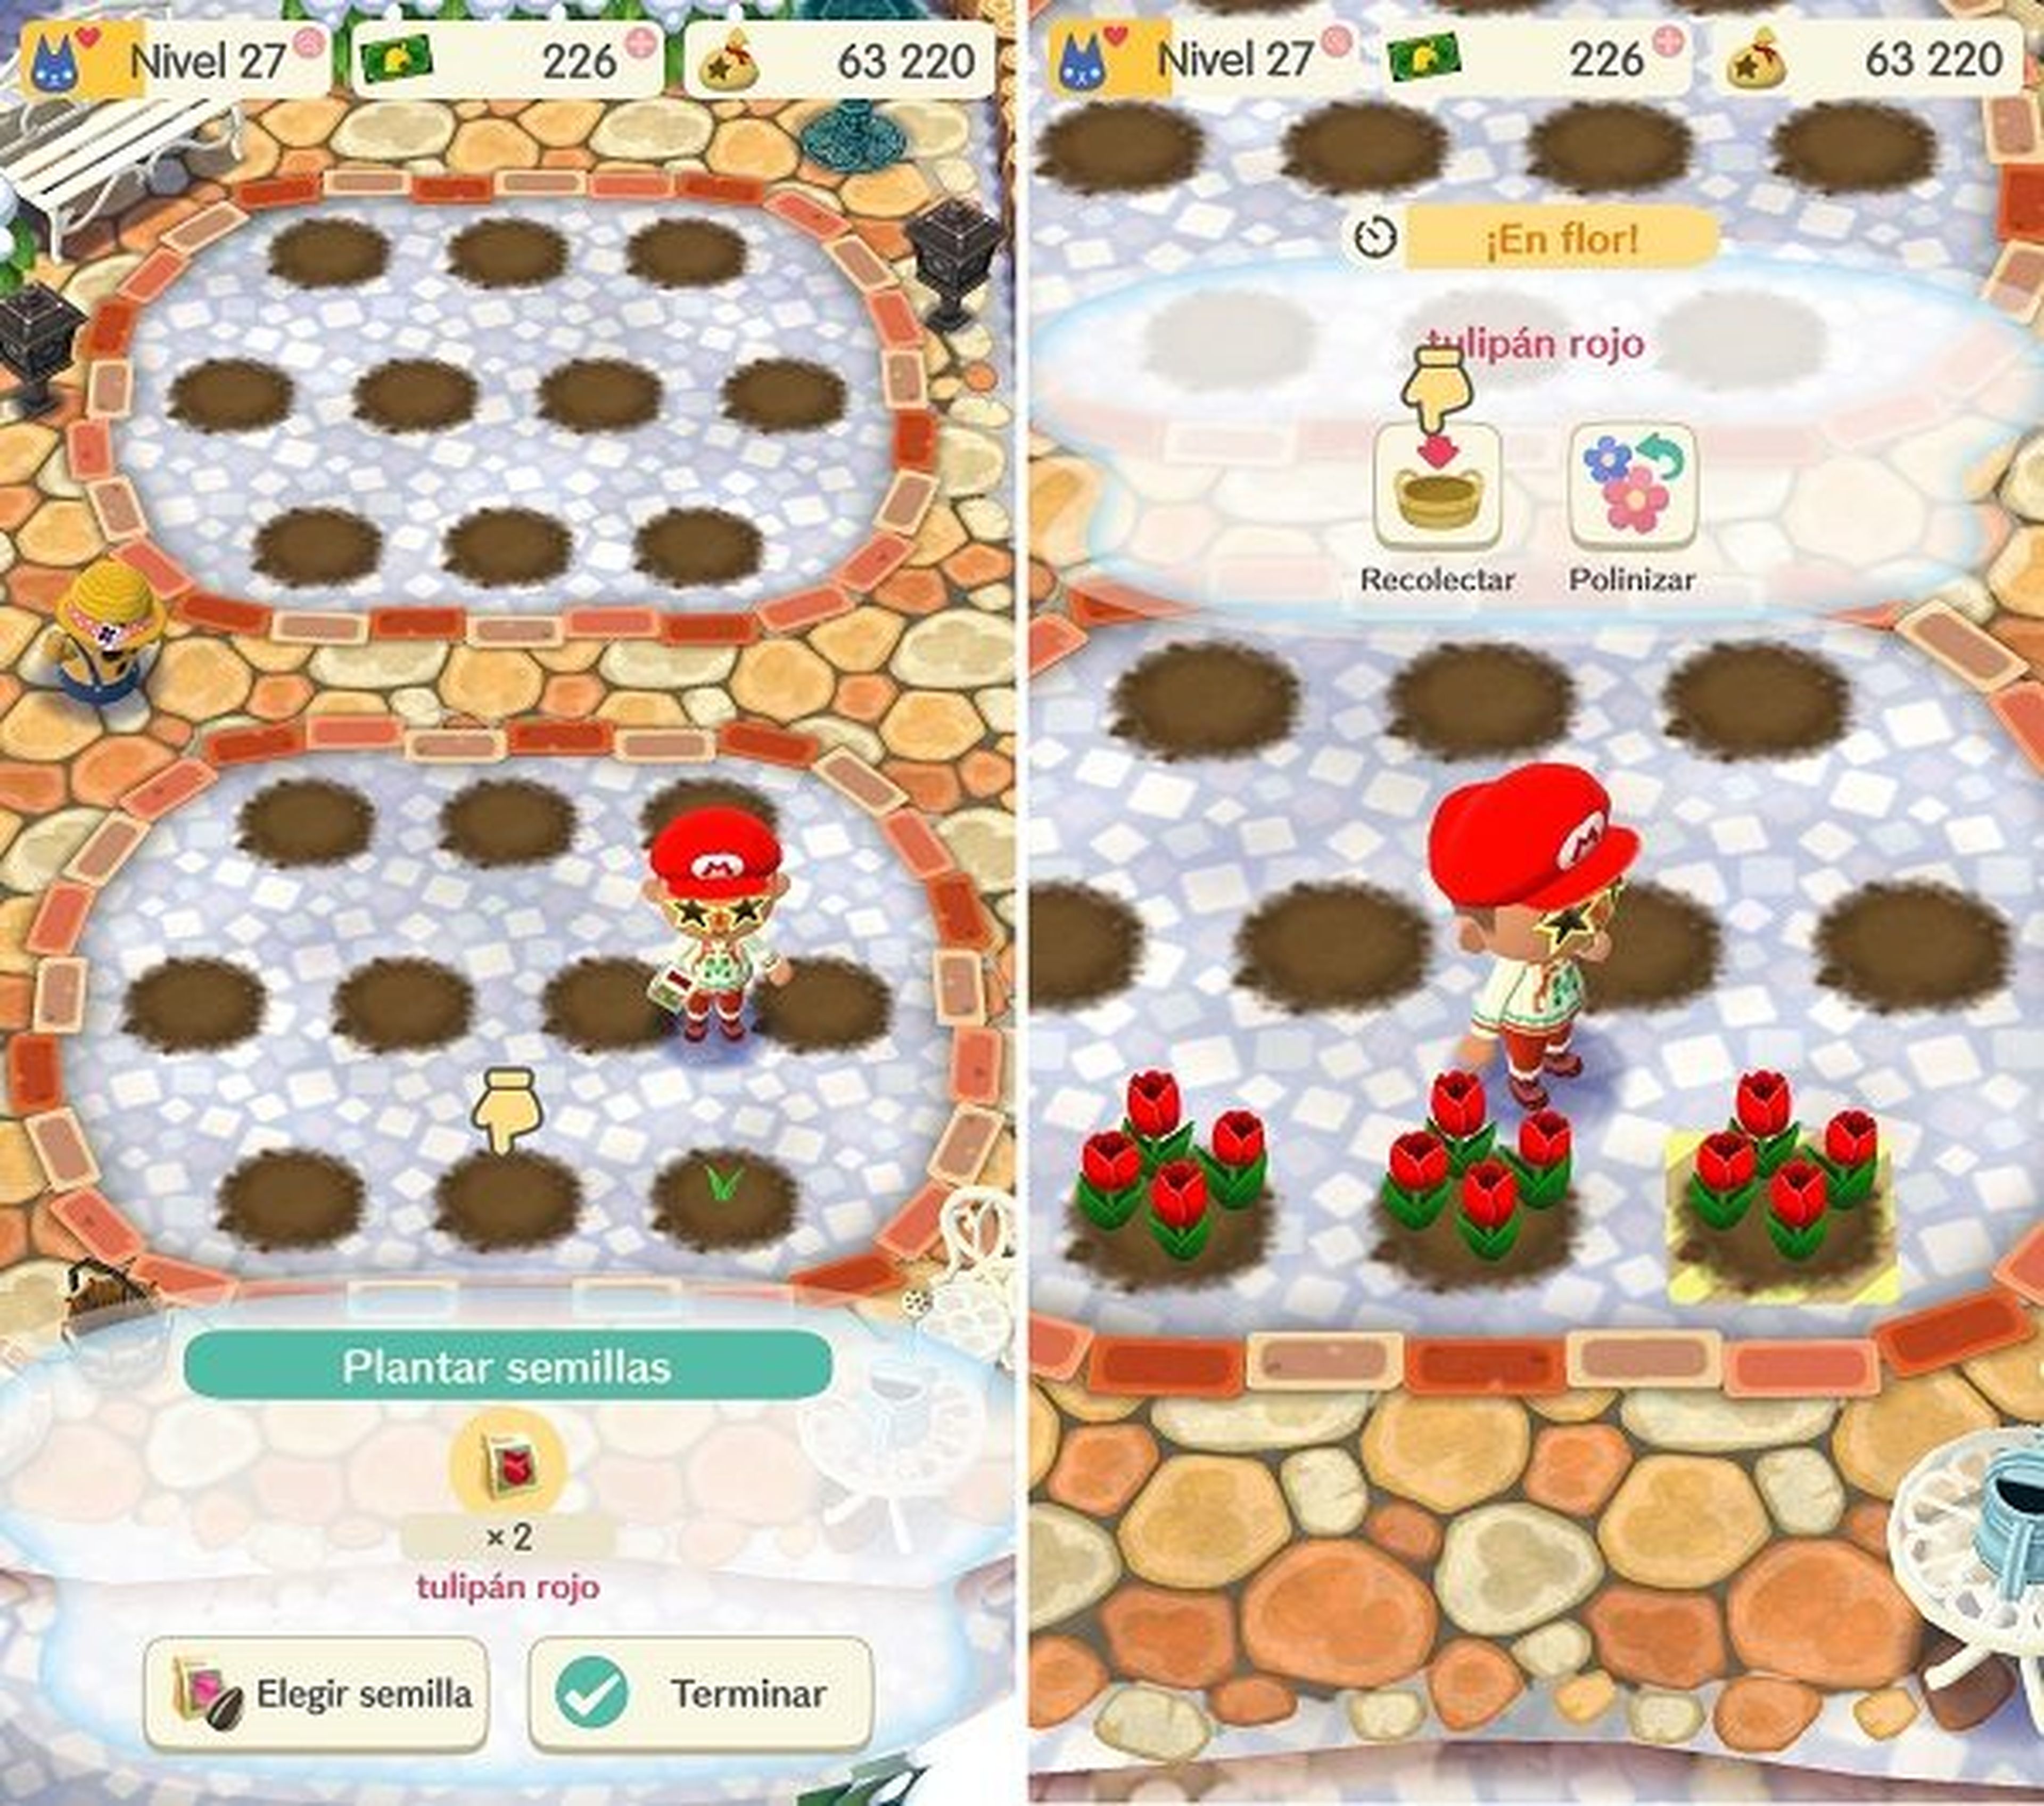 Animal Crossing Pocket Camp - Recolectar flores